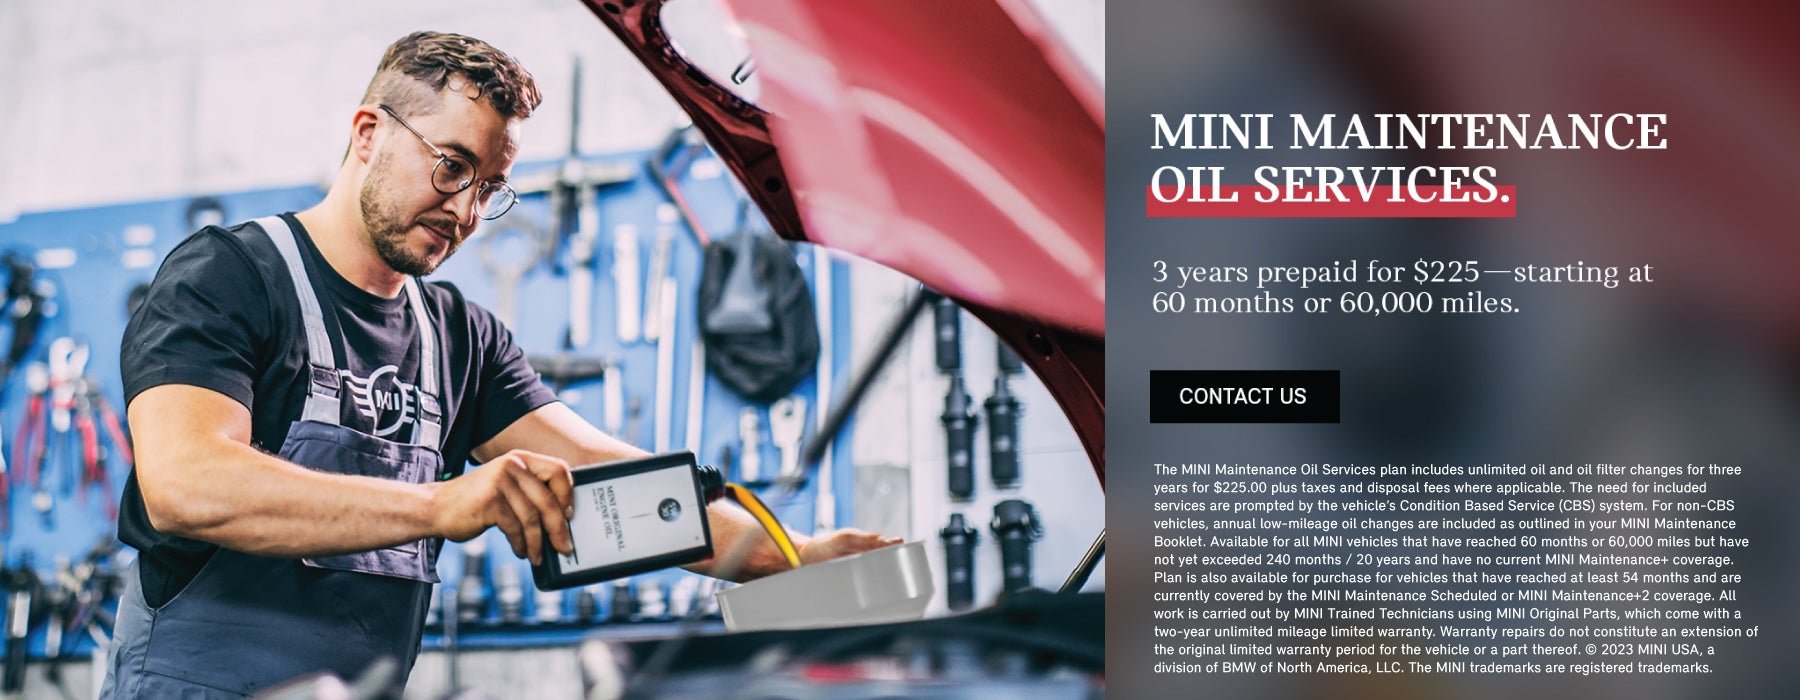 MINI maintenance oil services, 3 years prepaid for $225. 